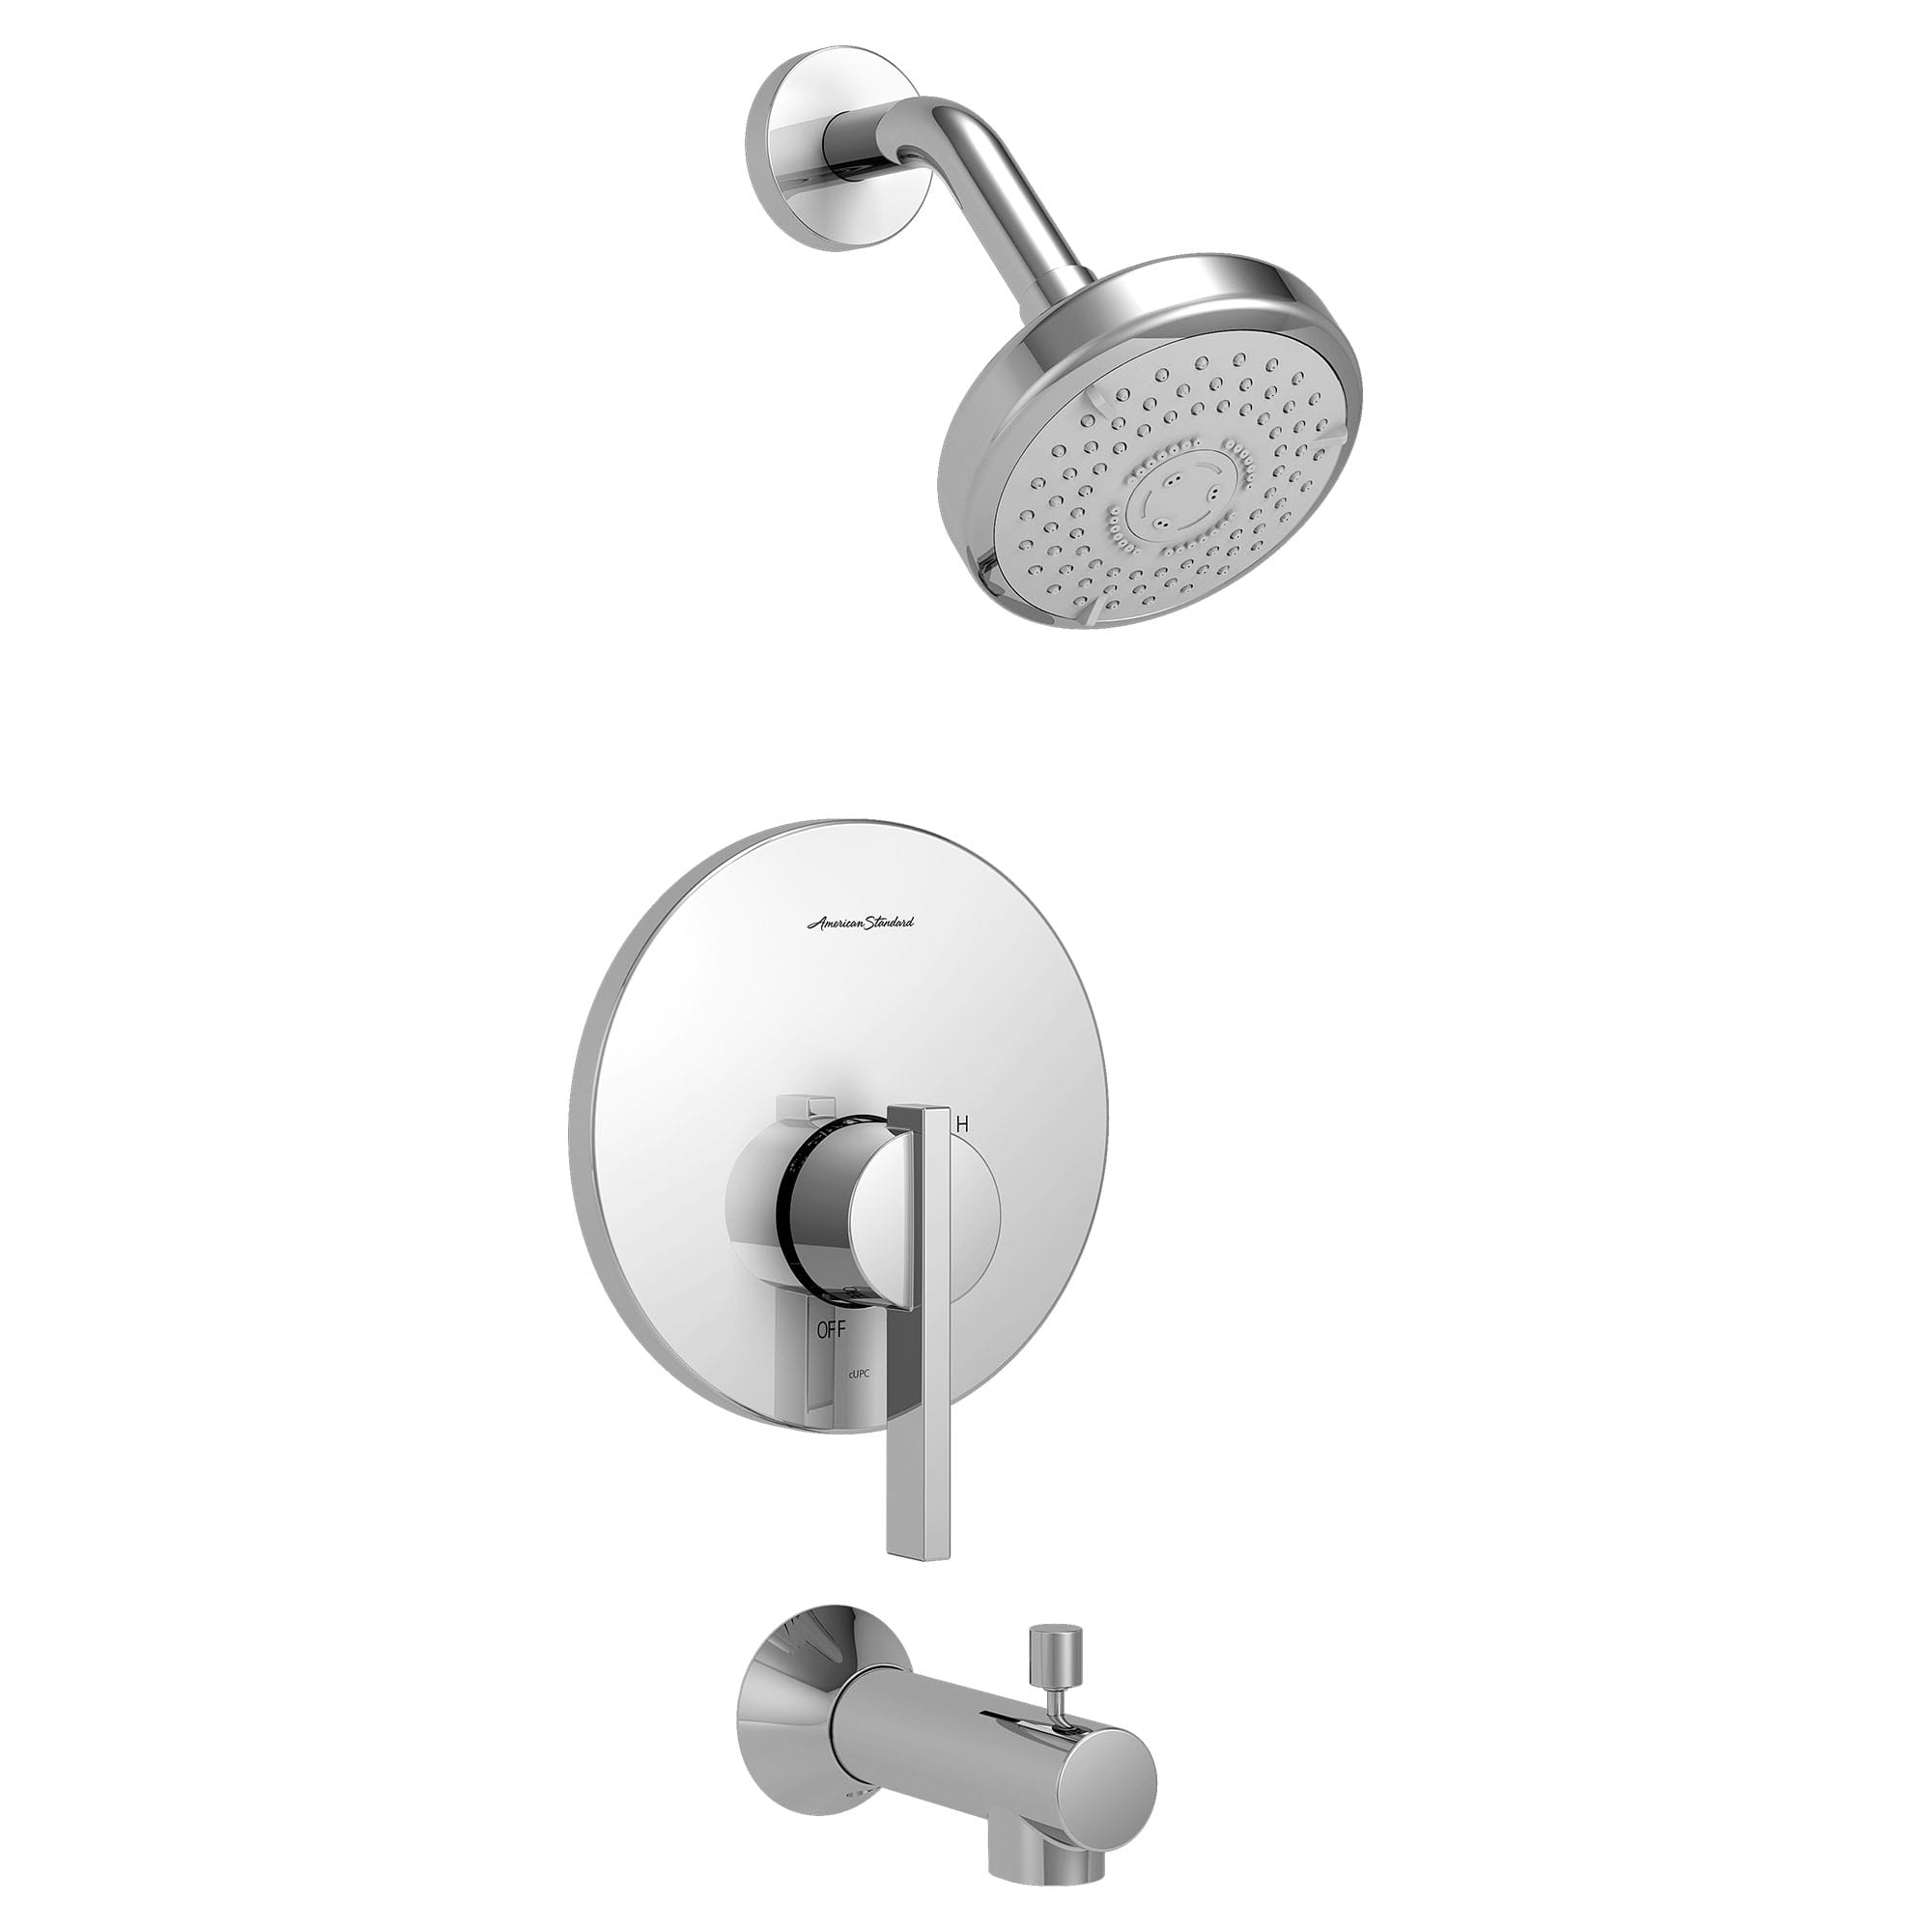 Berwick® 1.75 gpm/6.6 L/min Tub and Shower Trim Kit With 3-Function Showerhead, Double Ceramic Pressure Balance Cartridge and Lever Handle